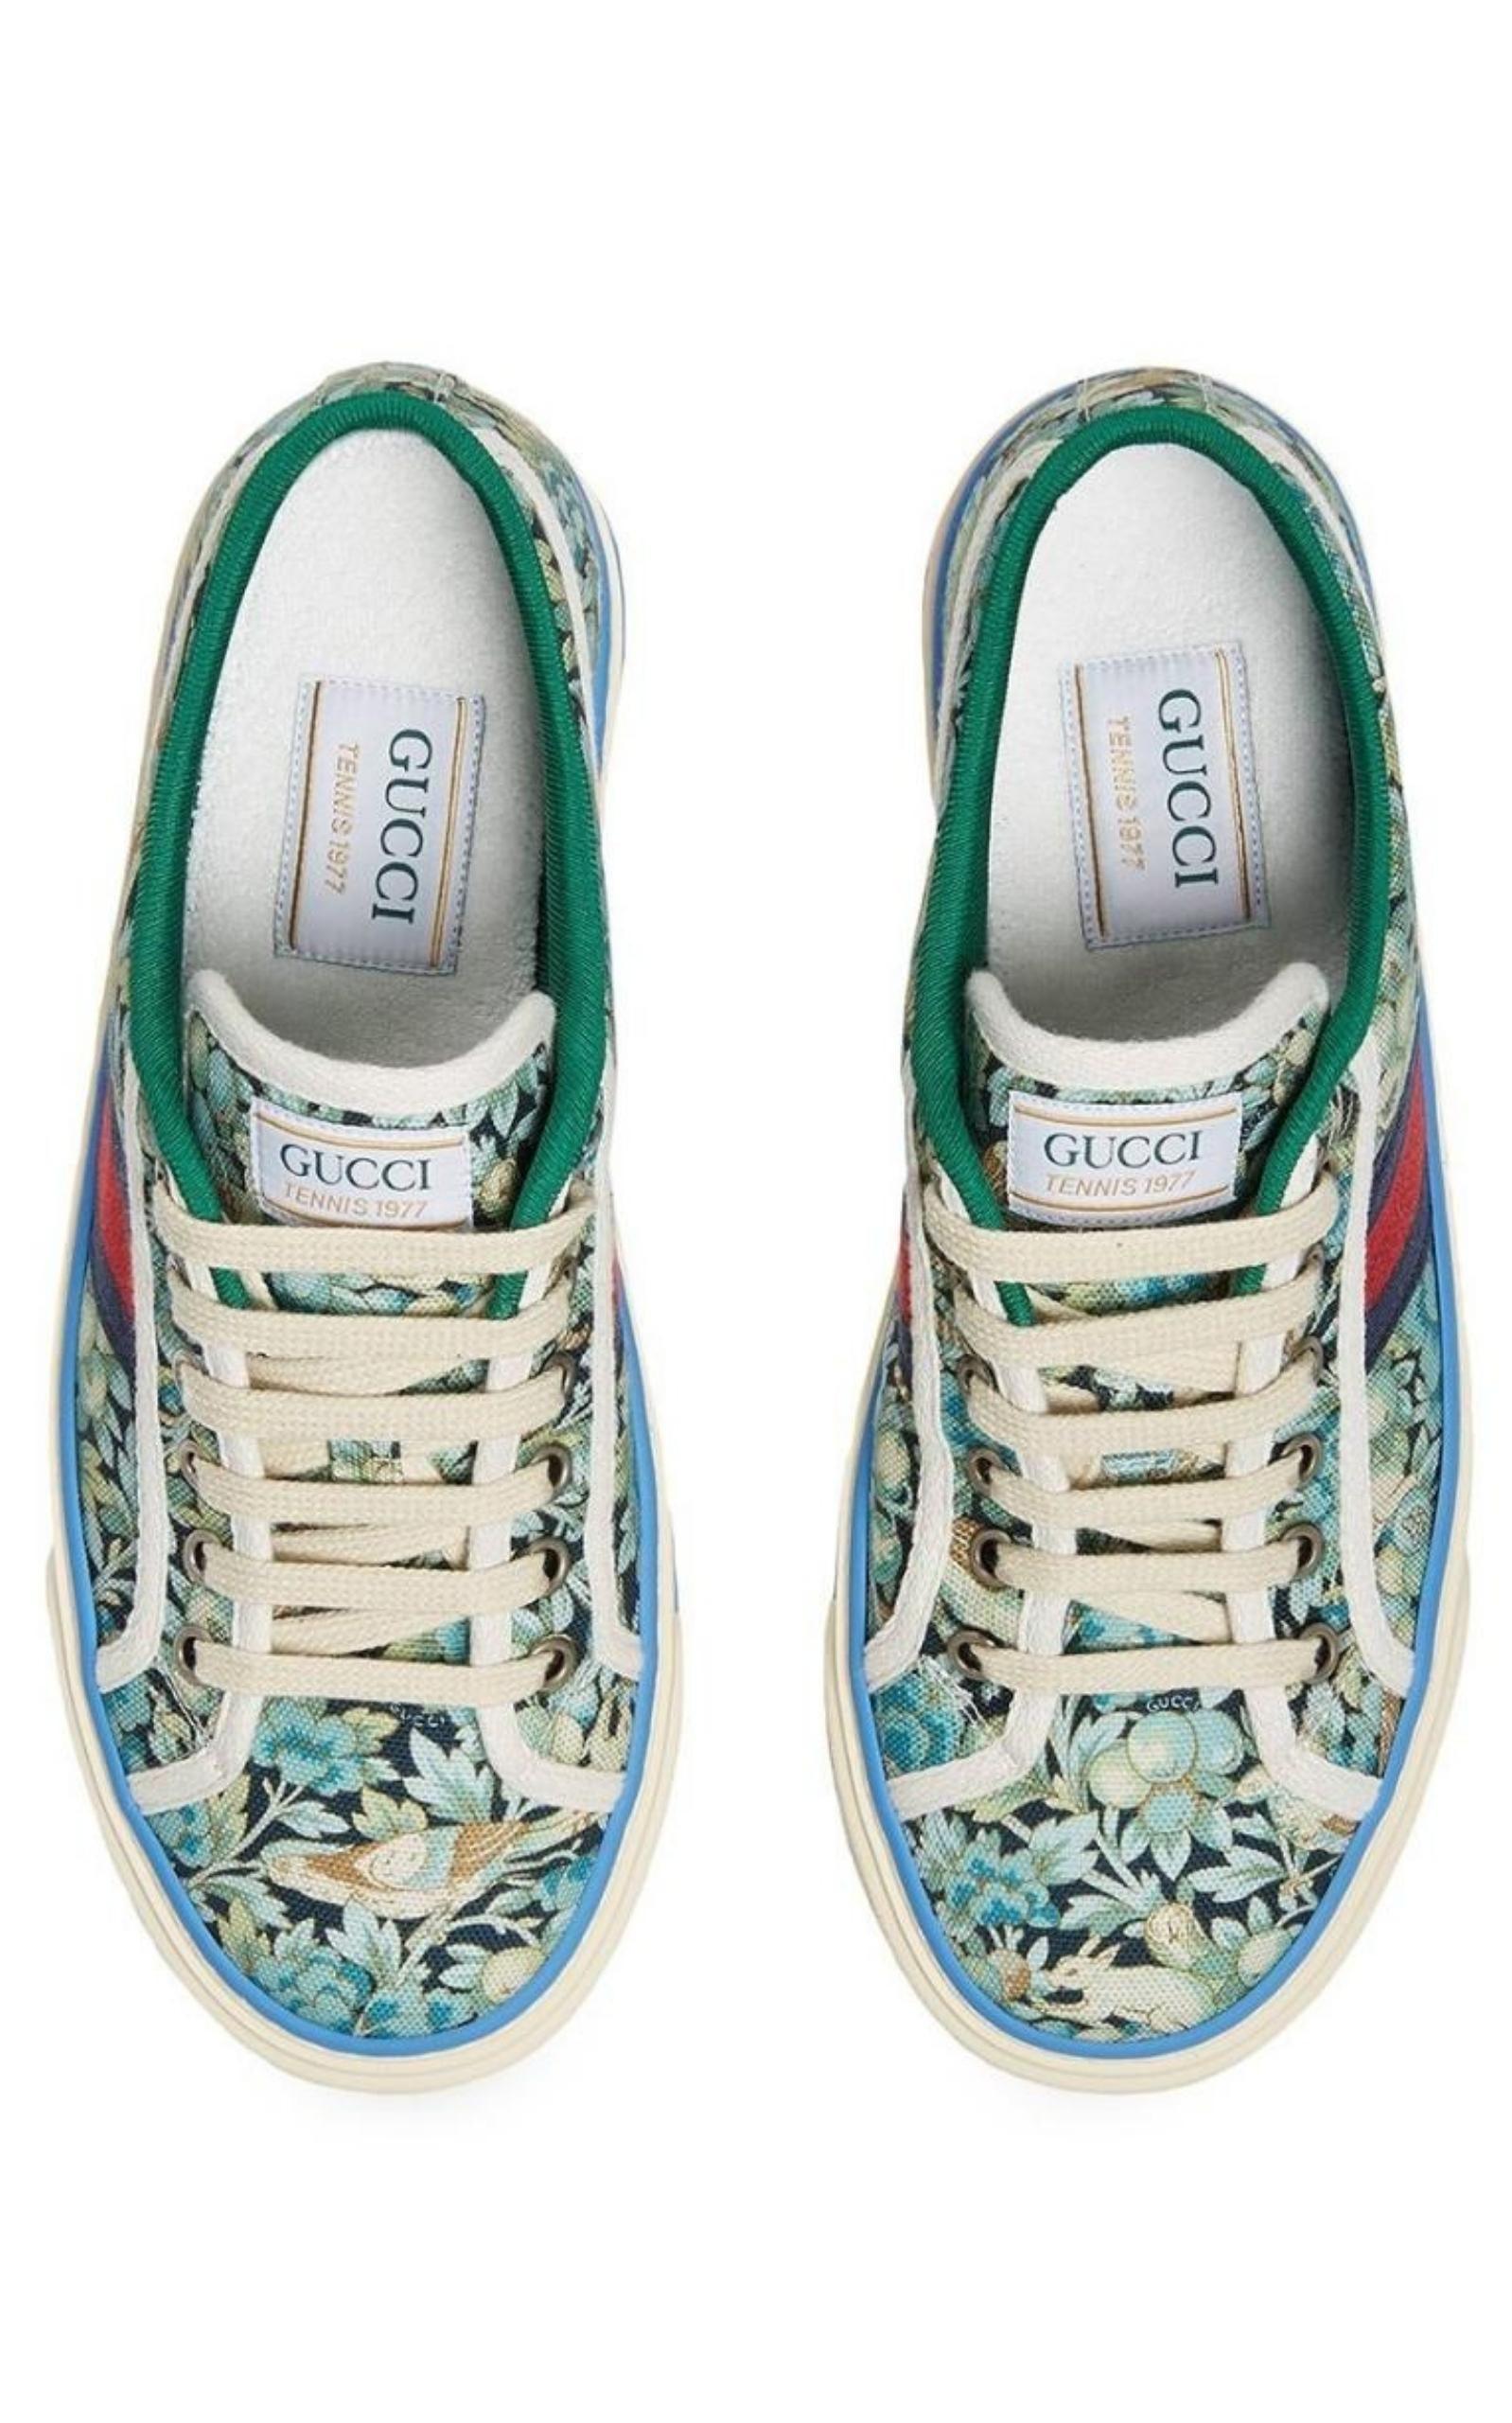 New Gucci Tennis 1977 Low 'GG Supreme Flora' Size 38 Sneakers 2